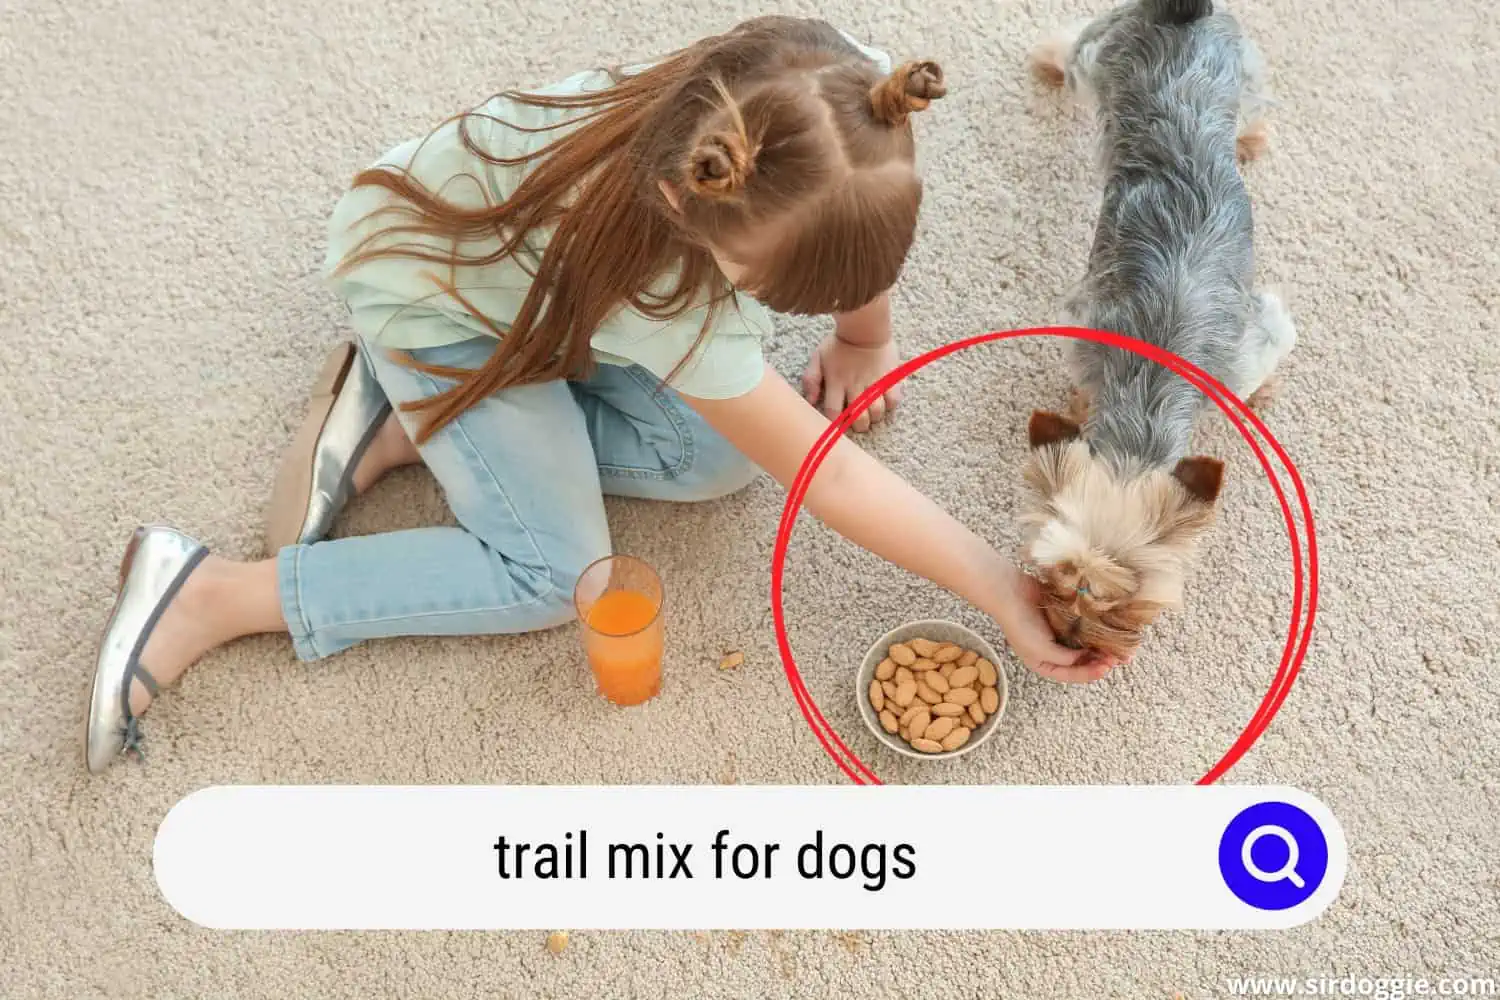 Careless Little Girl with Dog Eating Nuts and Drinking Juice While Sitting on Carpet